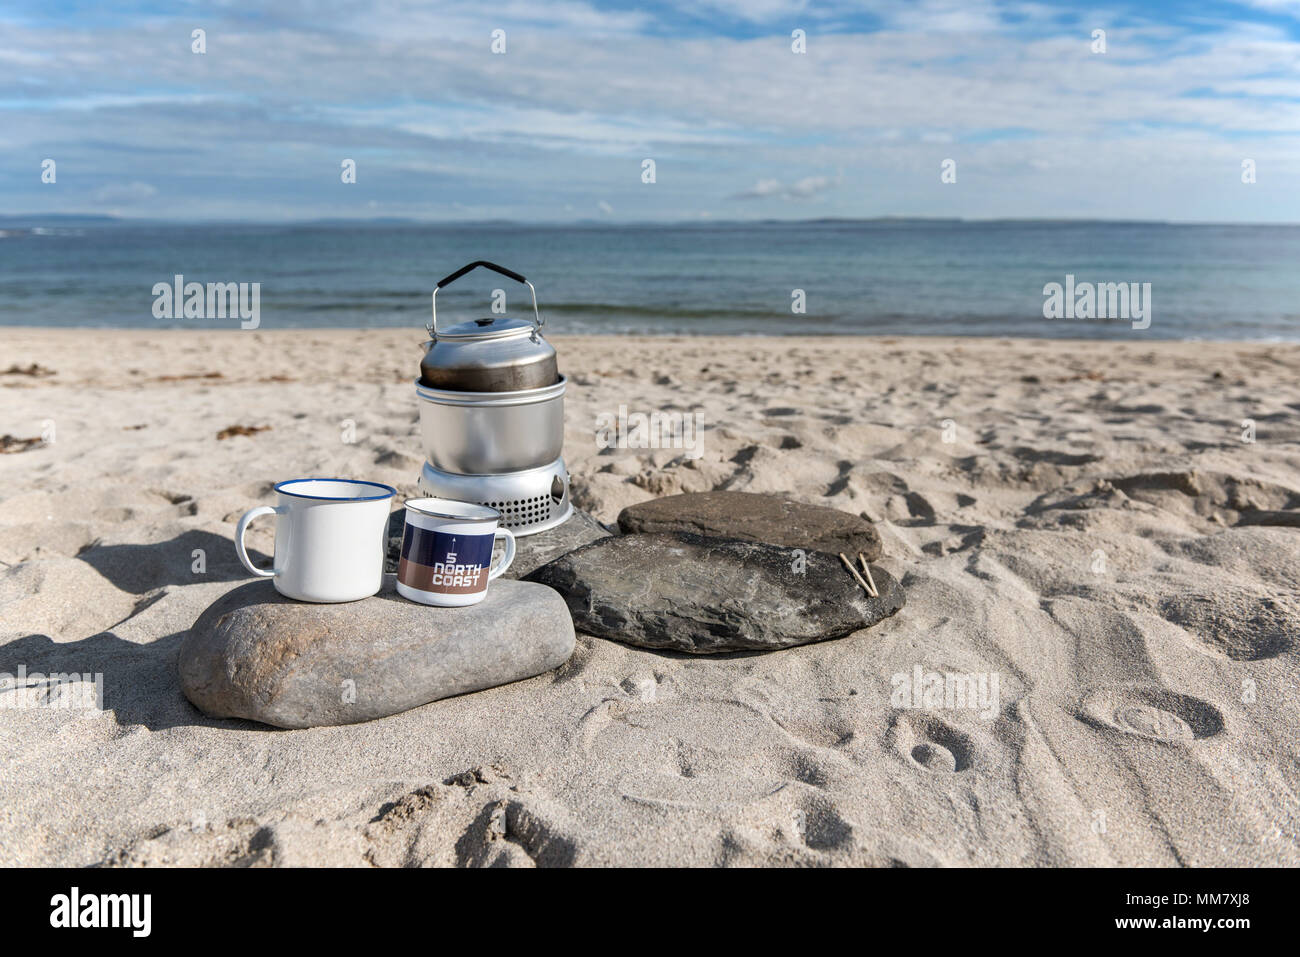 Wild camping on the beach at Sannick Bay, Caithness, Highlands, Scotland. Making a brew. Stock Photo